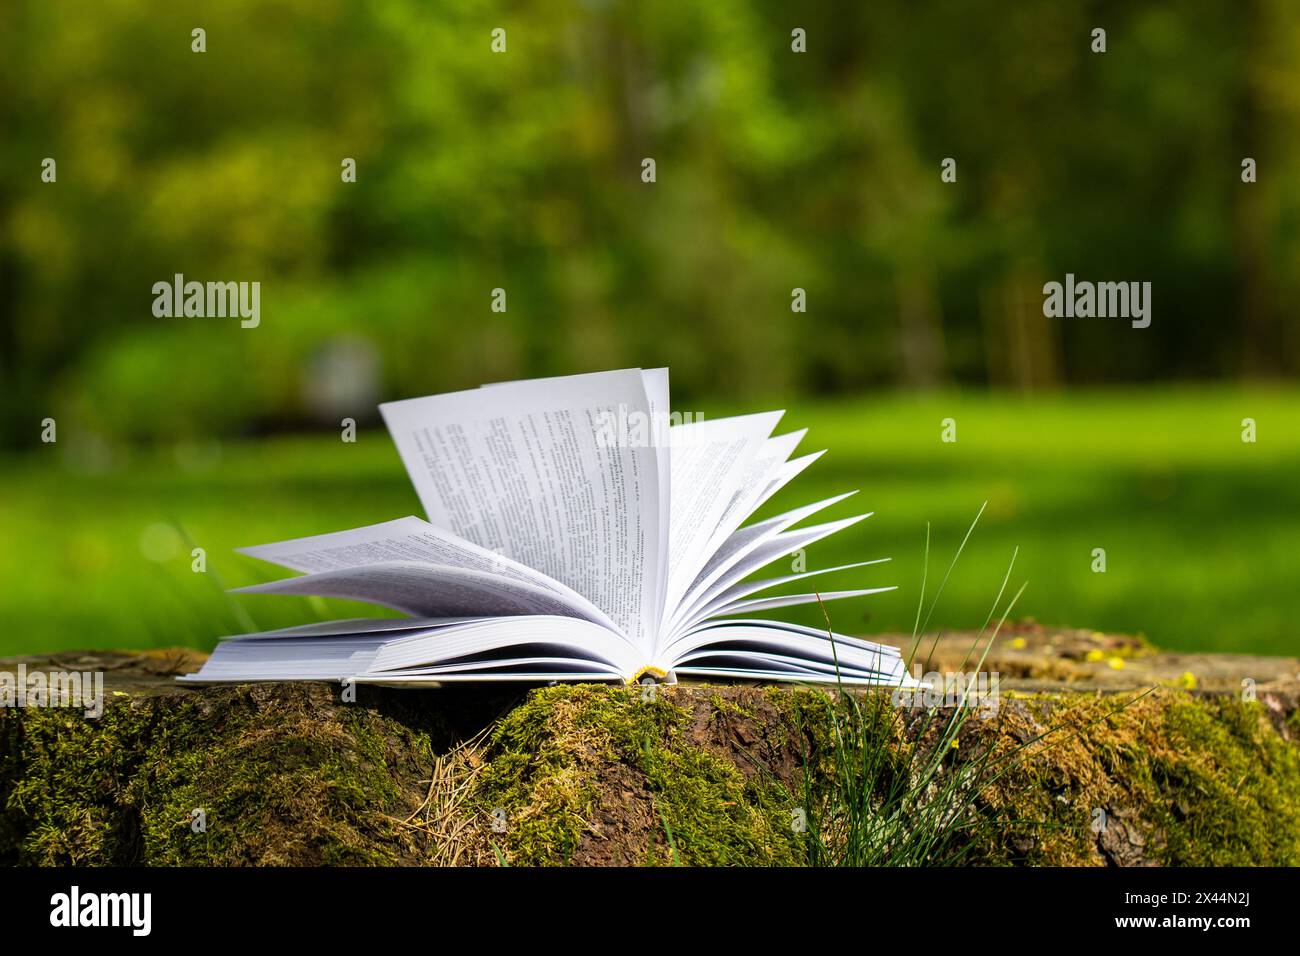 an open book on a tree stump in the park, sunny day, greenery in the background, white book in green Stock Photo